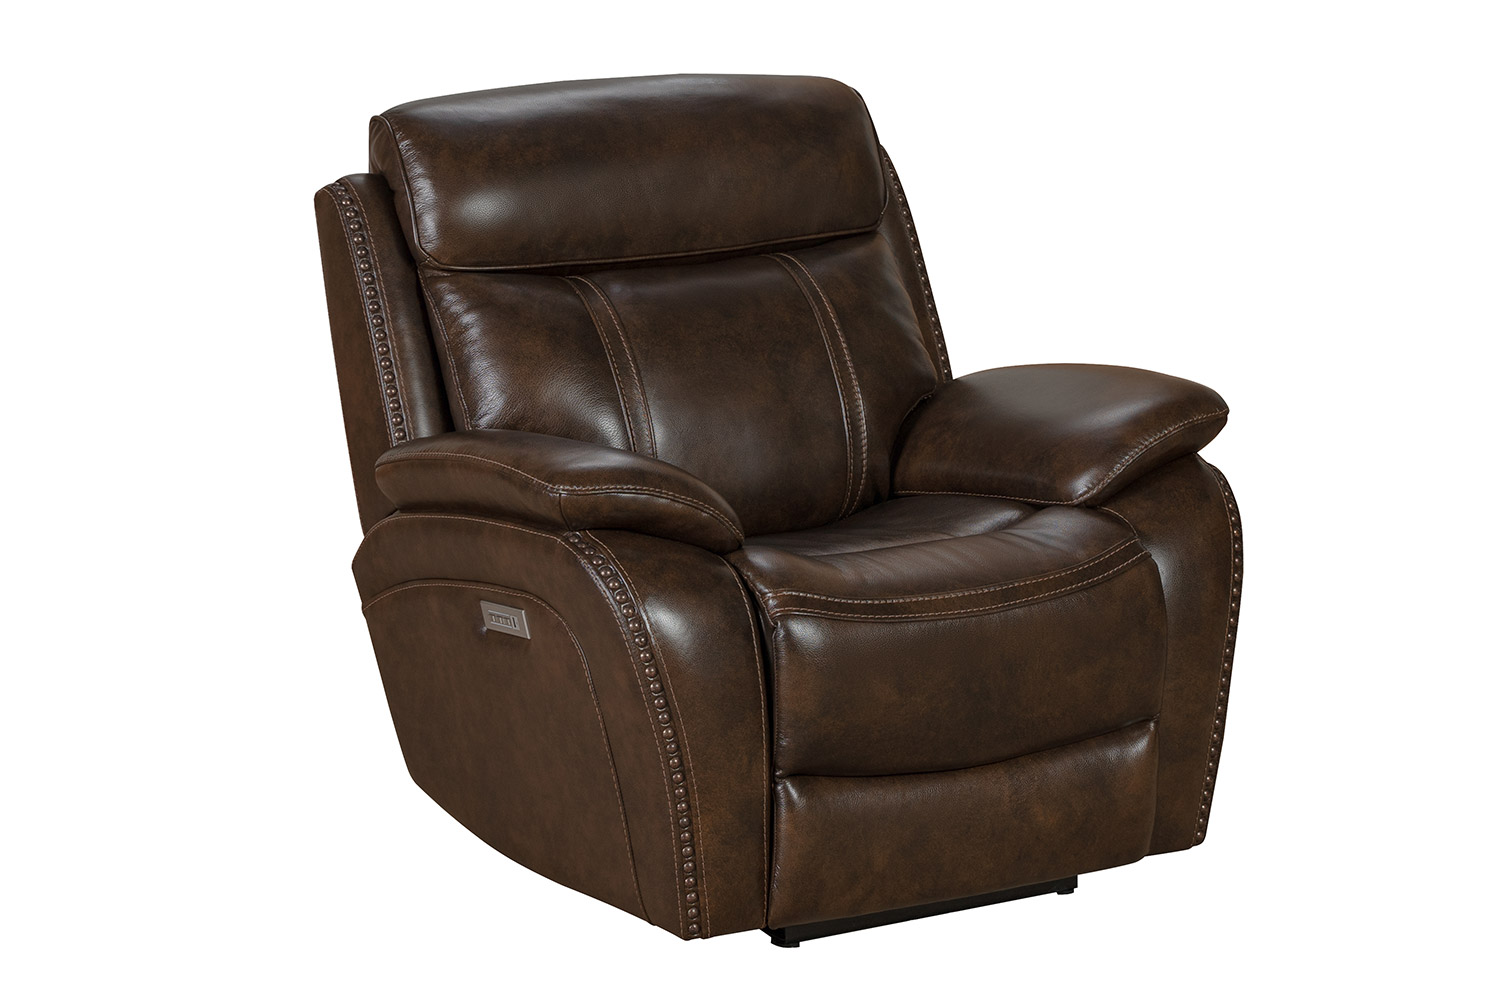 Barcalounger Sandover Power Recliner Chair with Power Head Rest and Lumbar - Tri-Tone Chocolate/Leather match